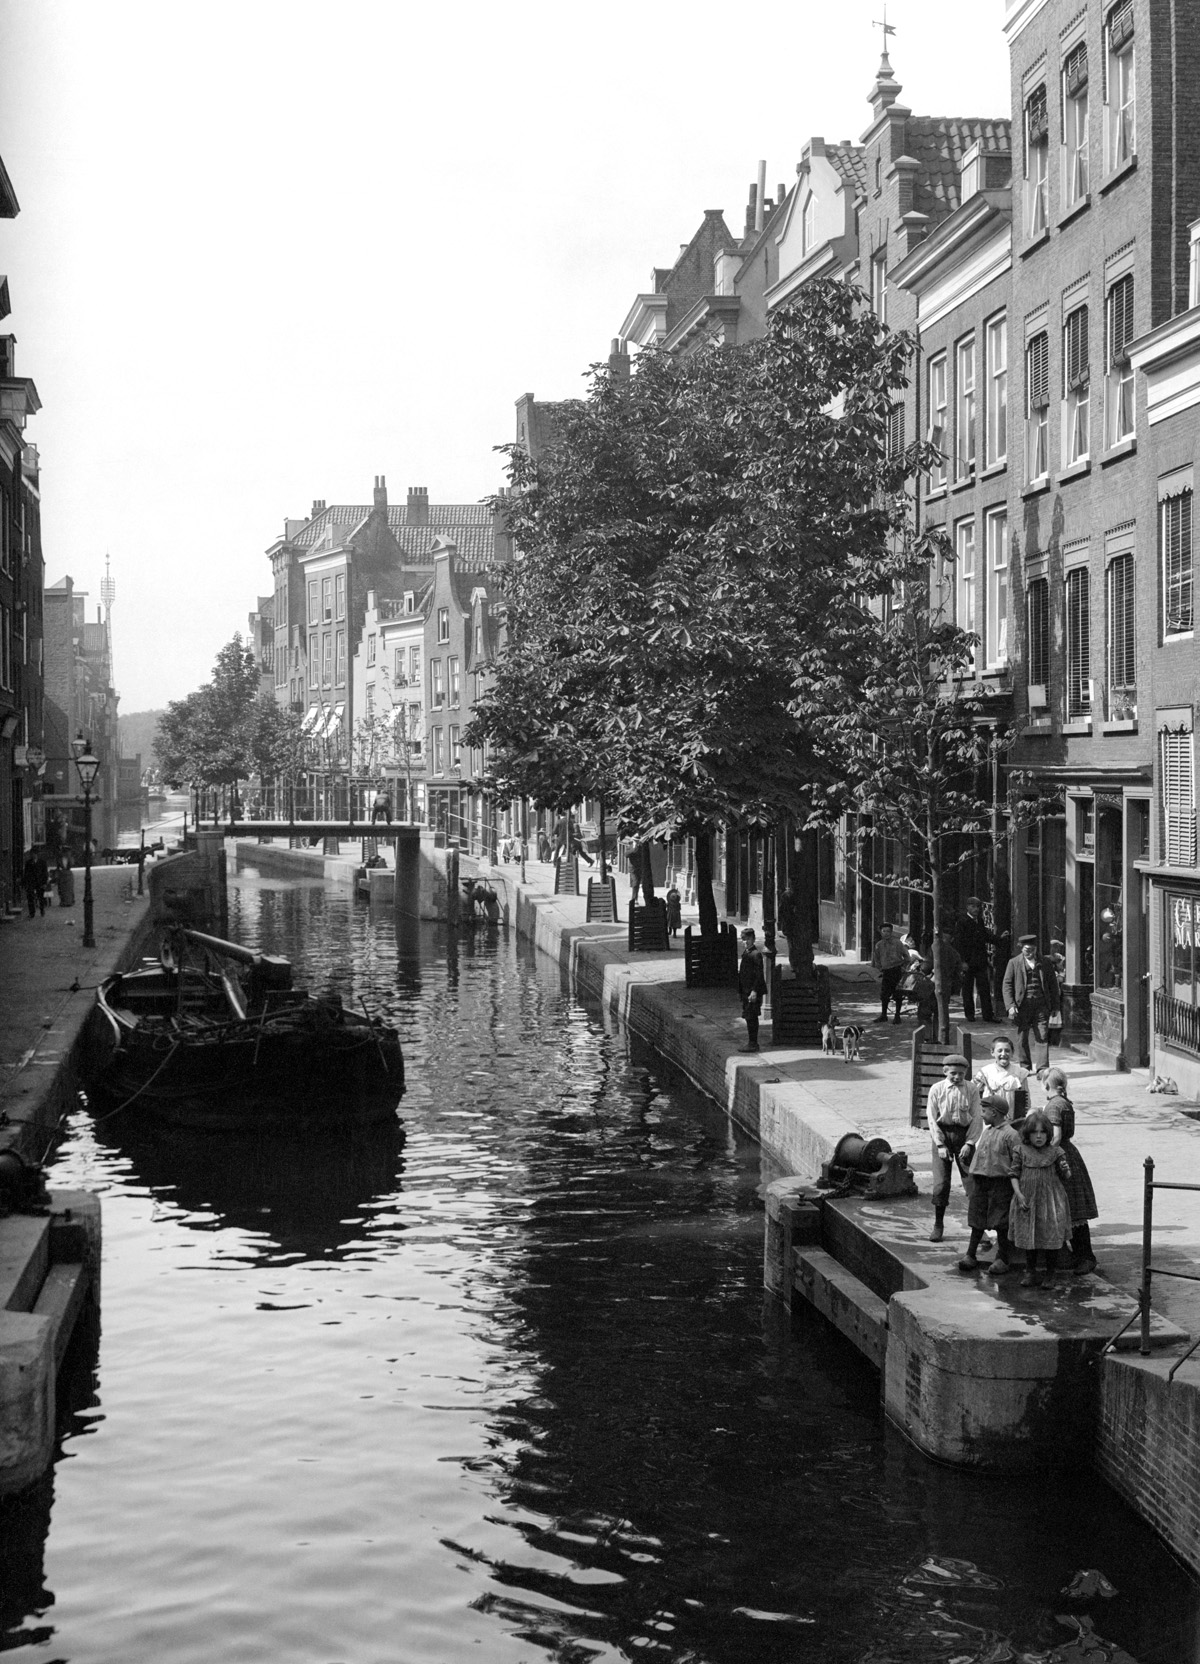 Spuiwaterboot Canal in Rotterdam as seen from a bridge. One of a series of images taken in Europe in 1904 by an unknown photographer. Scanned from the nitrocellulose negative. View full size.